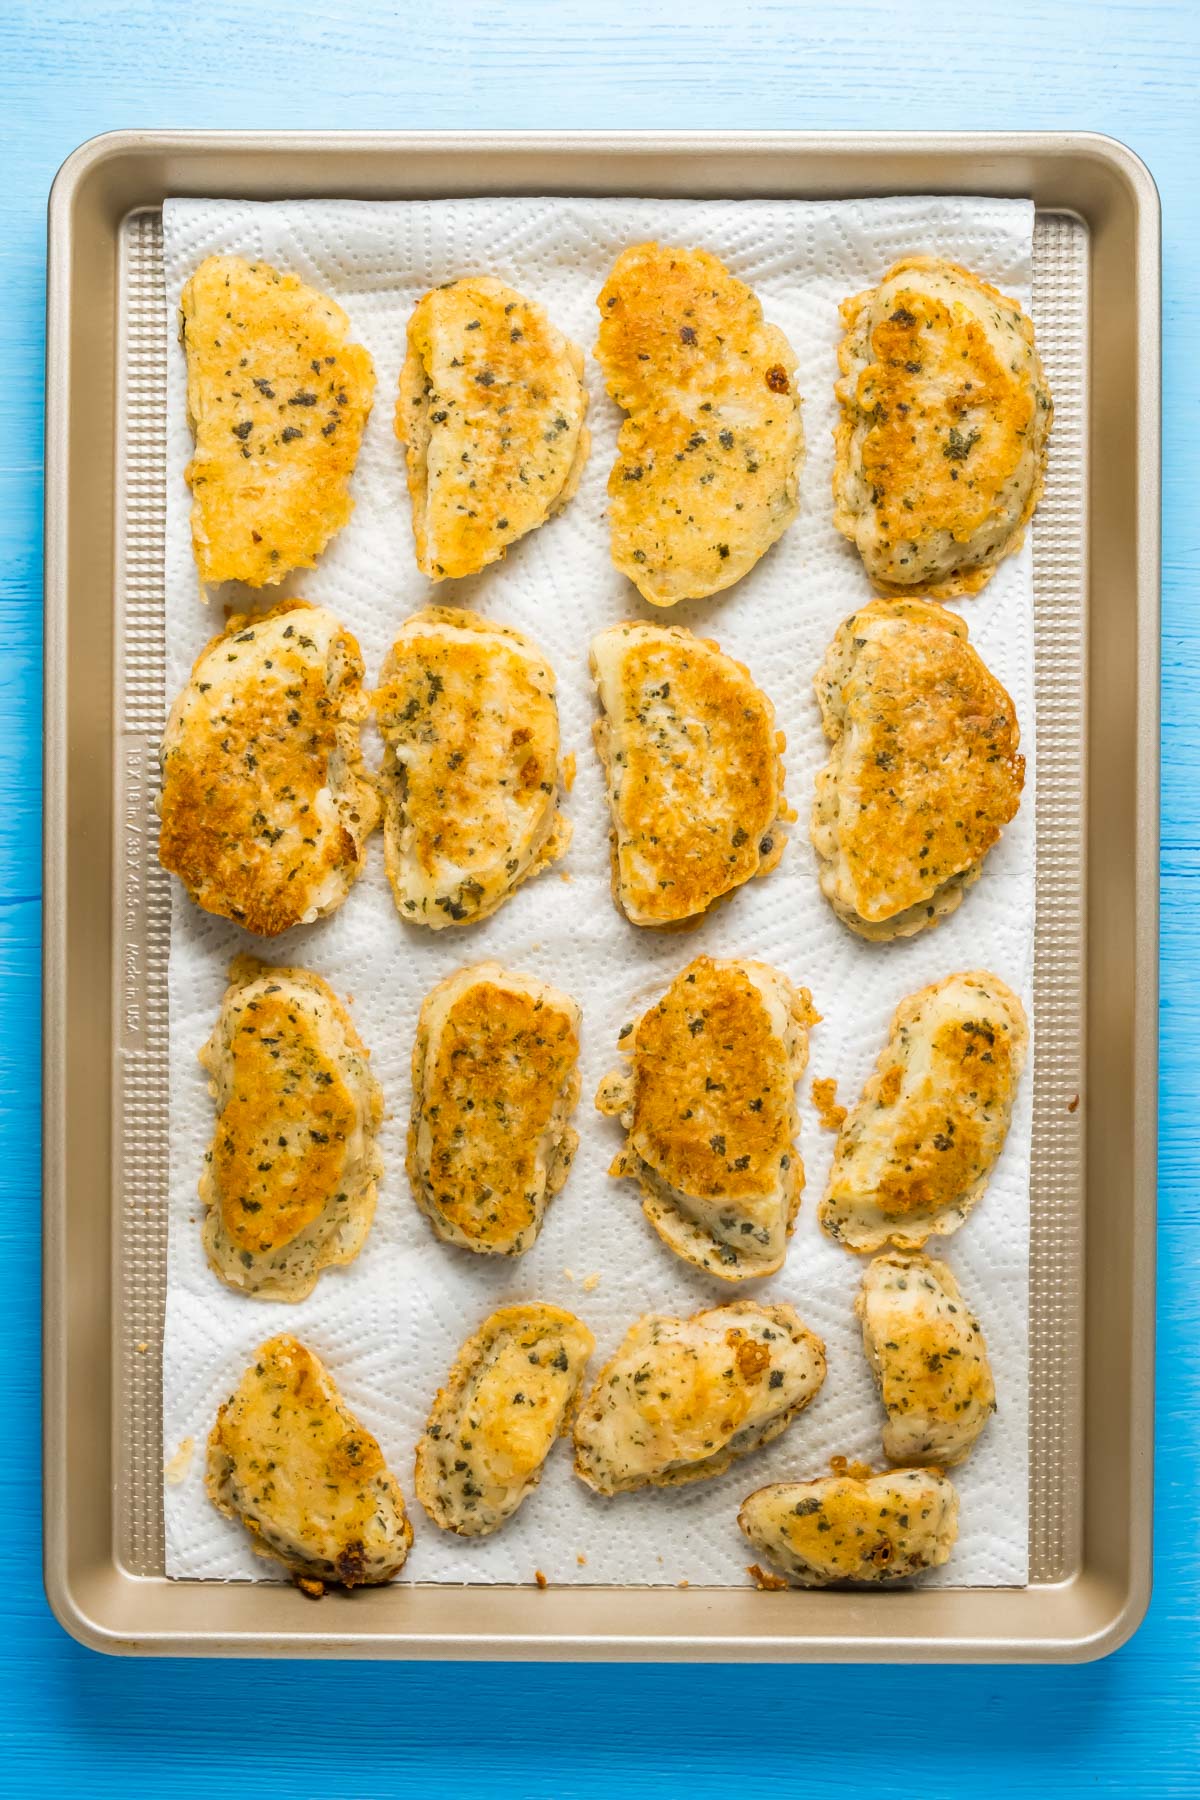 Fried vegan fish pieces on a tray lined with paper towels.